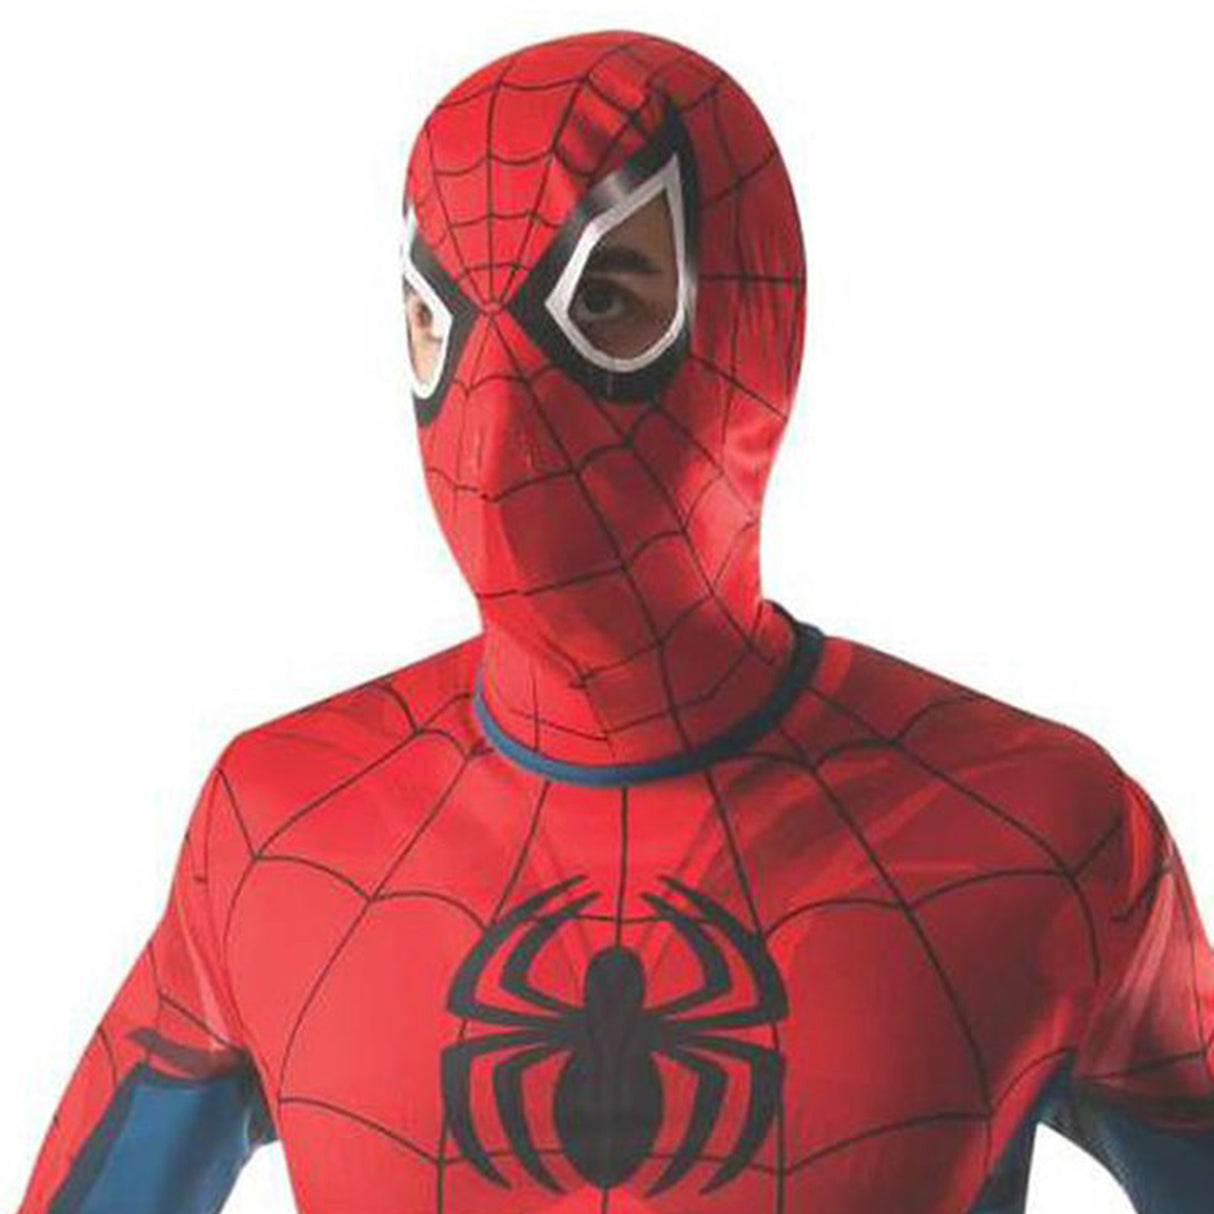 Rubies Spiderman Adult Costume, Red (X-Large)